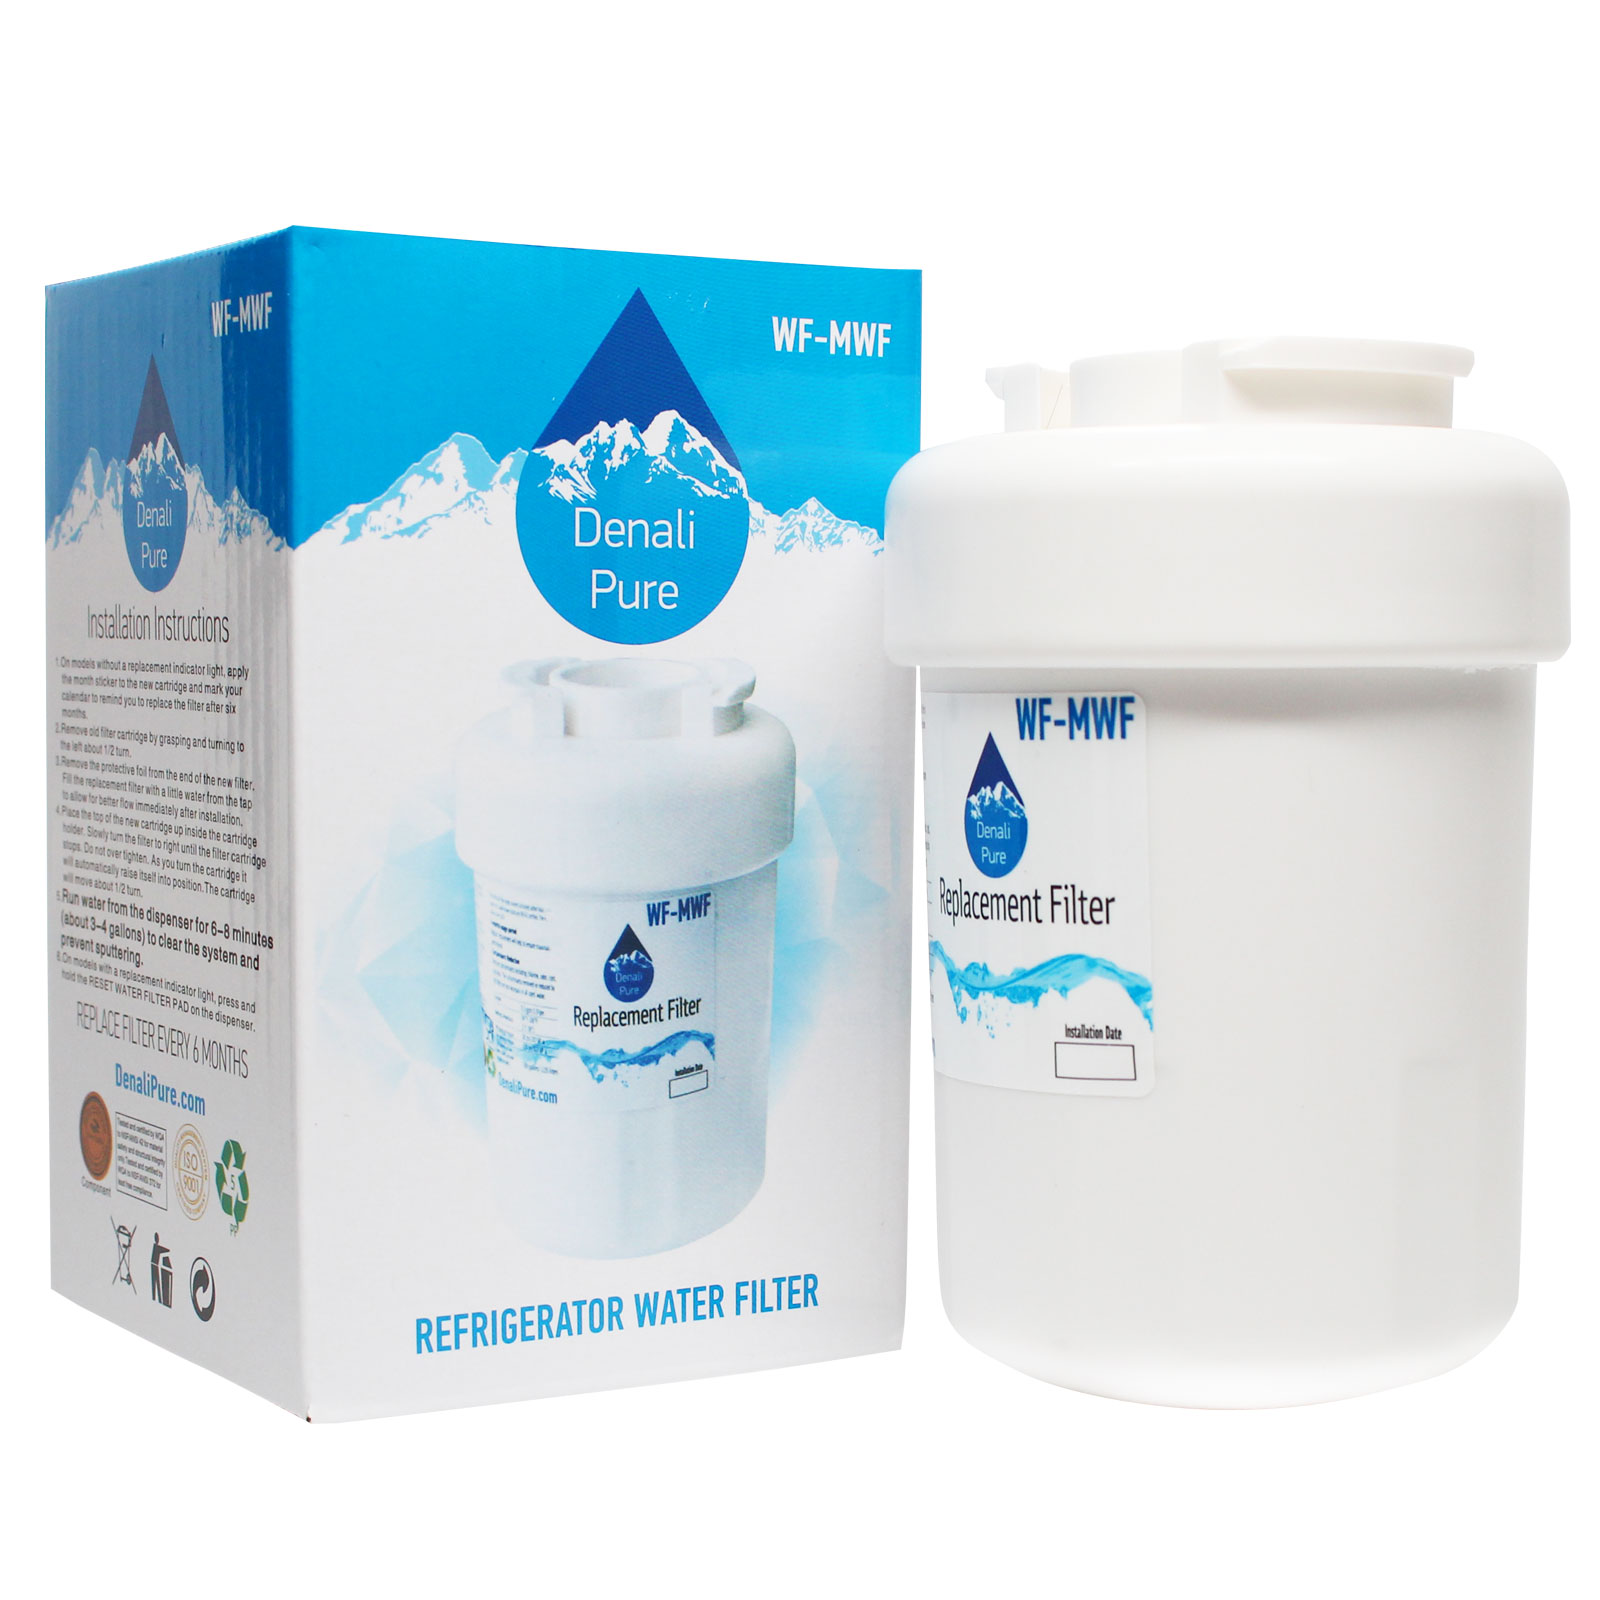 Replacement General Electric GSS25QGSCBB Refrigerator Water Filter - Compatible General Electric MWF, MWFP Fridge Water Filter Cartridge - Denali Pure Brand - image 1 of 3